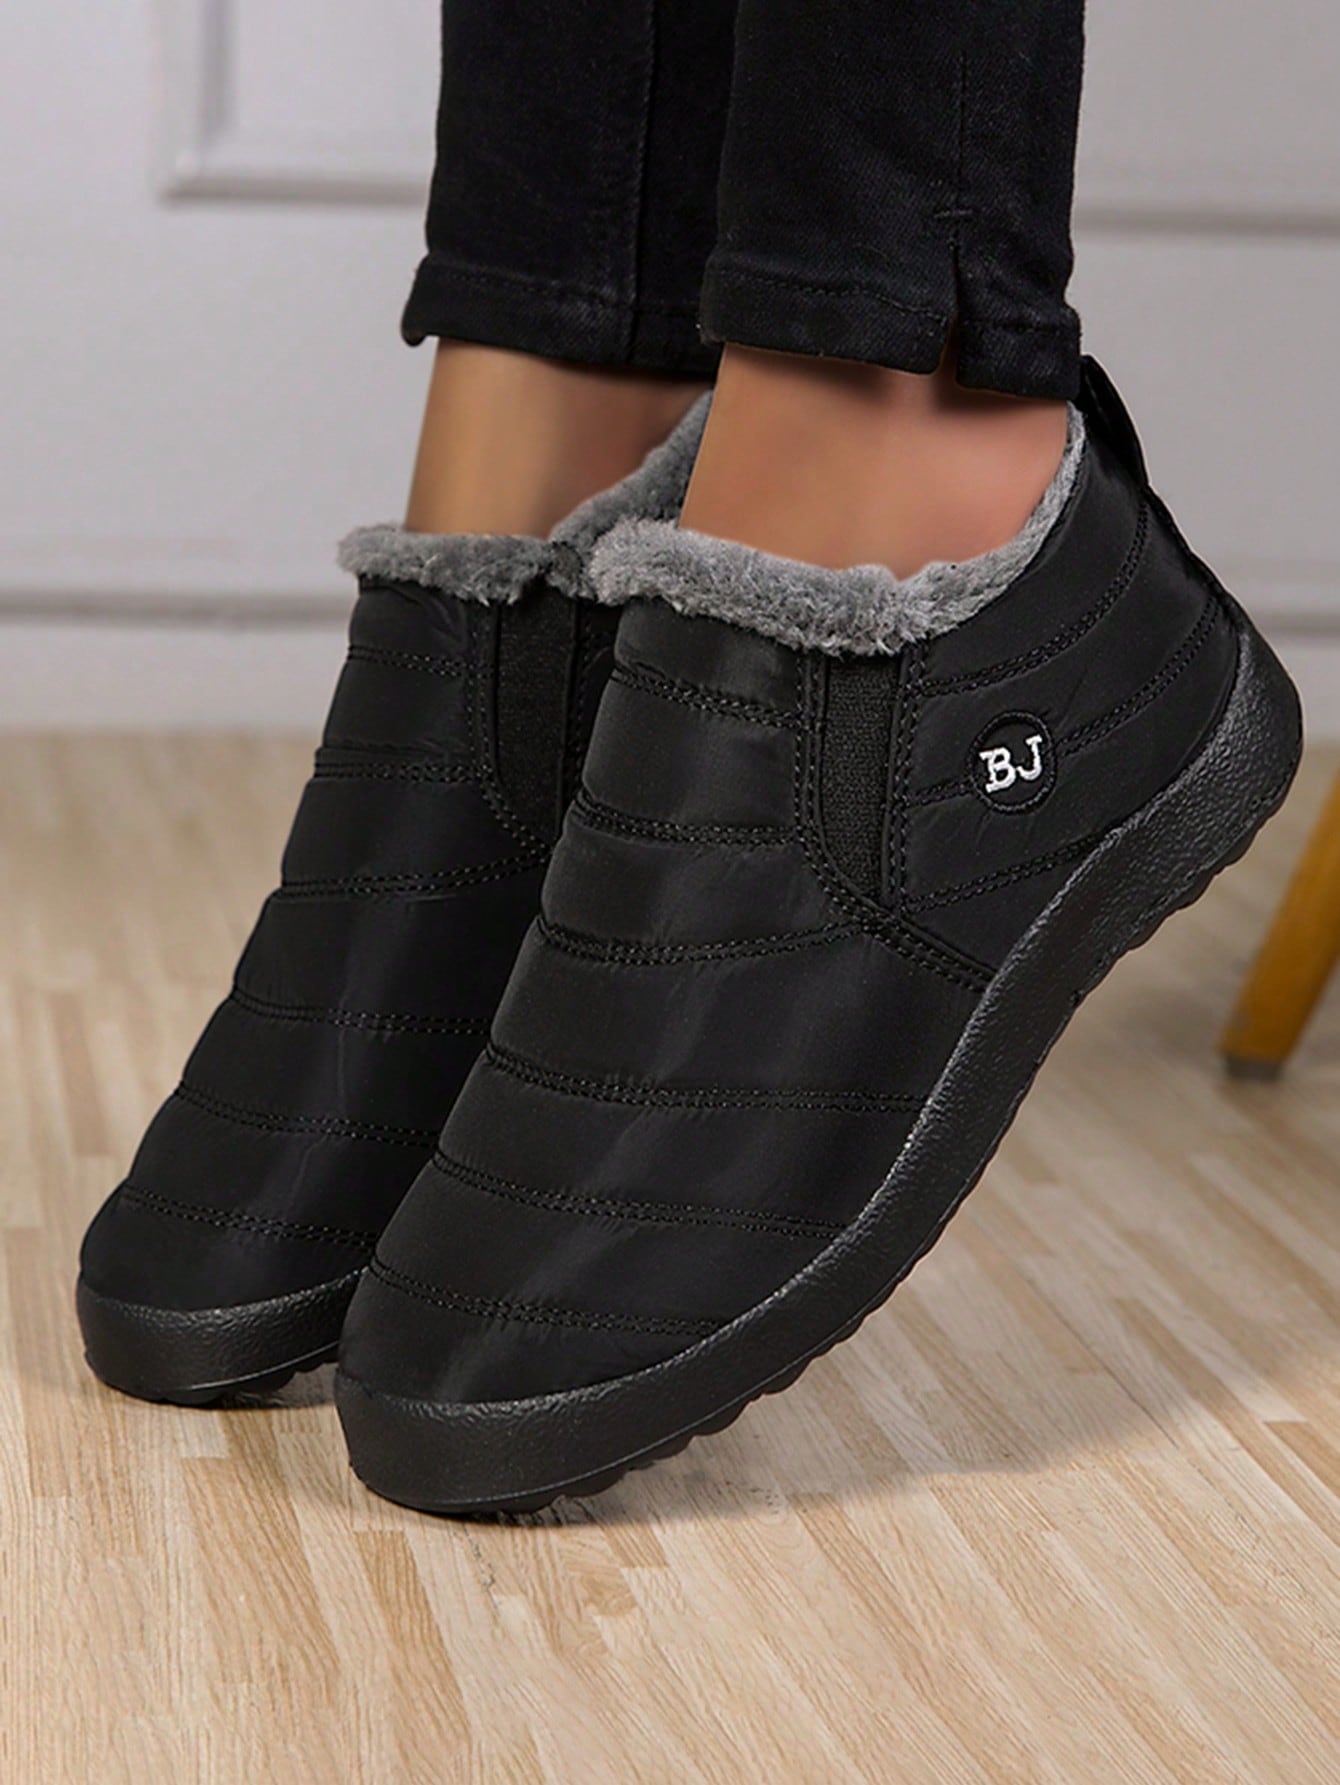 Women's Solid Color Casual Warm Snow Boots